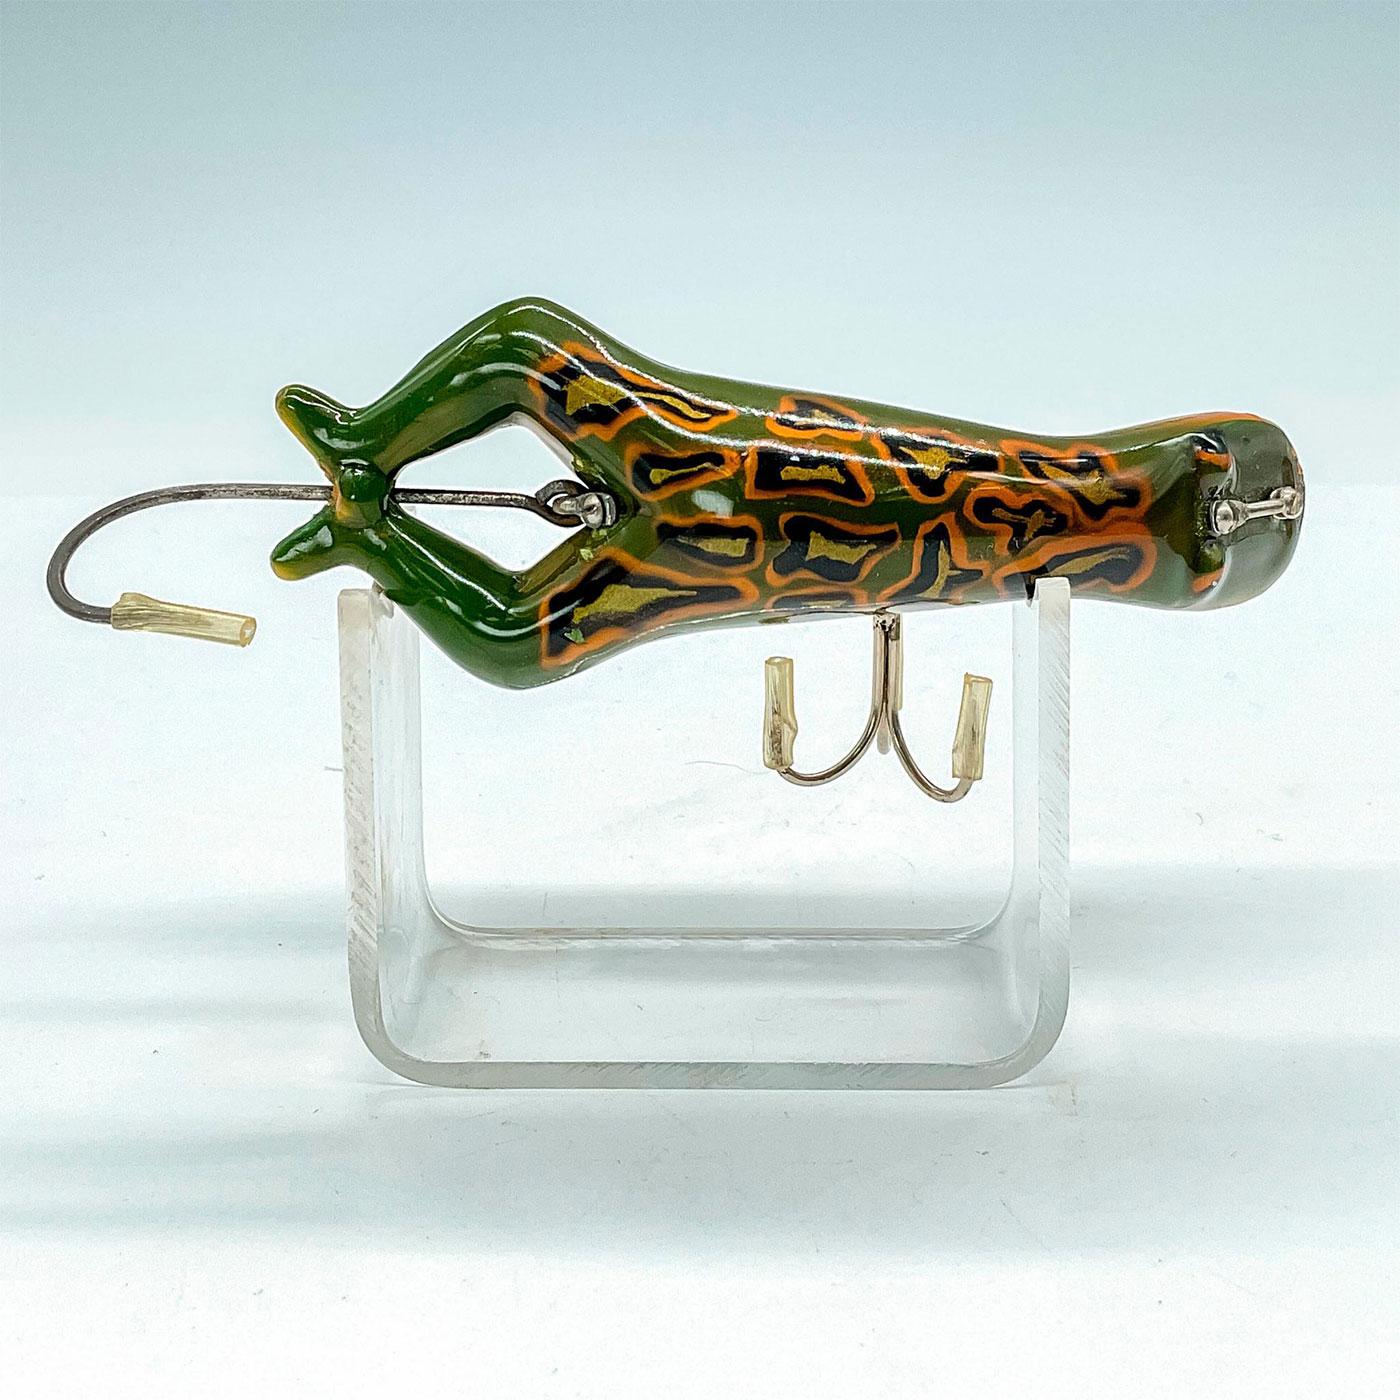 Sold at Auction: Early Heddon Luny Frog Open Leg Fishing Lure